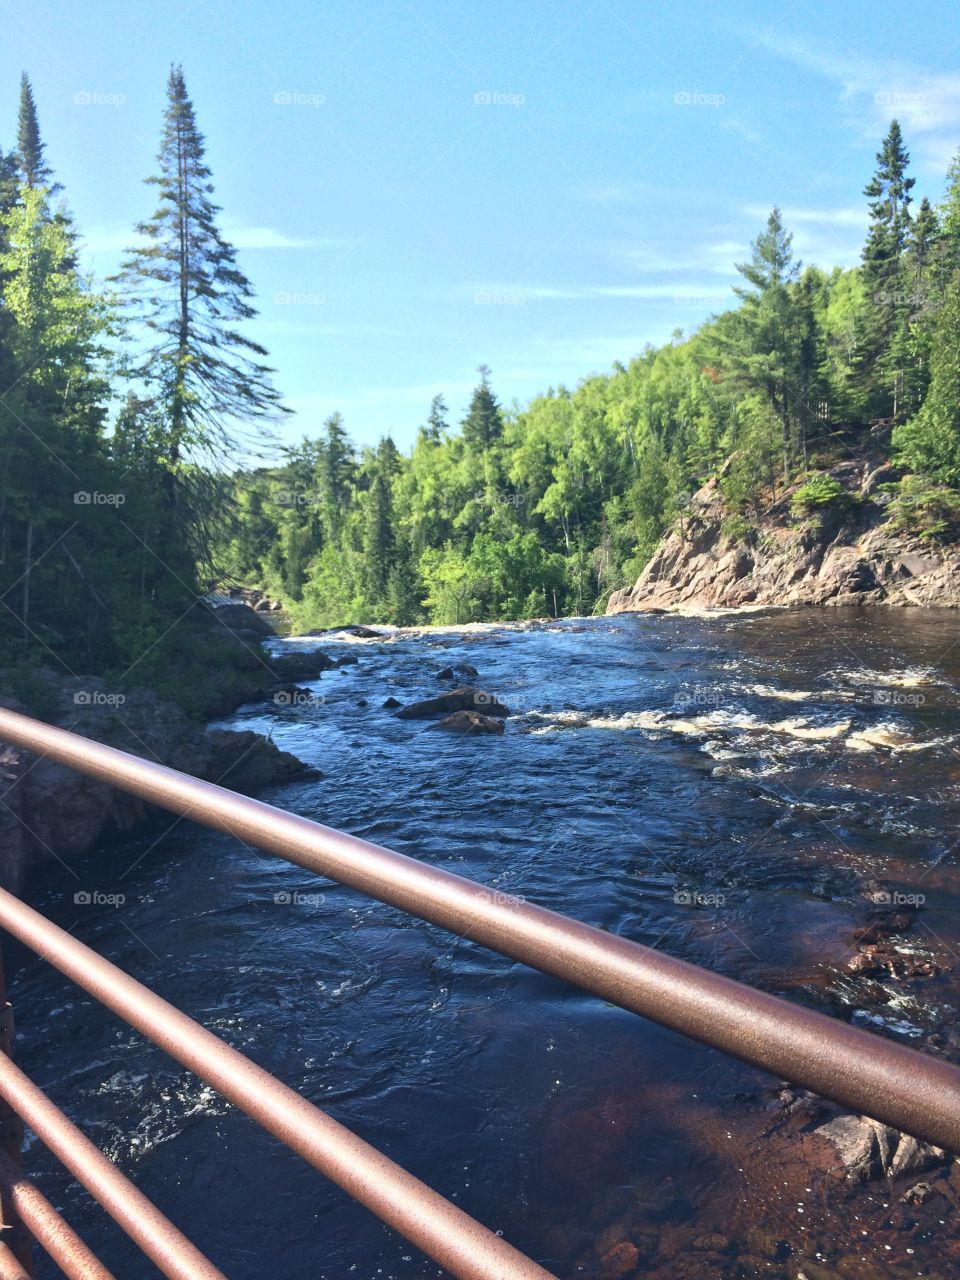 The river wild on a steel bridge, looking at evergreens, blue skies, and rocks